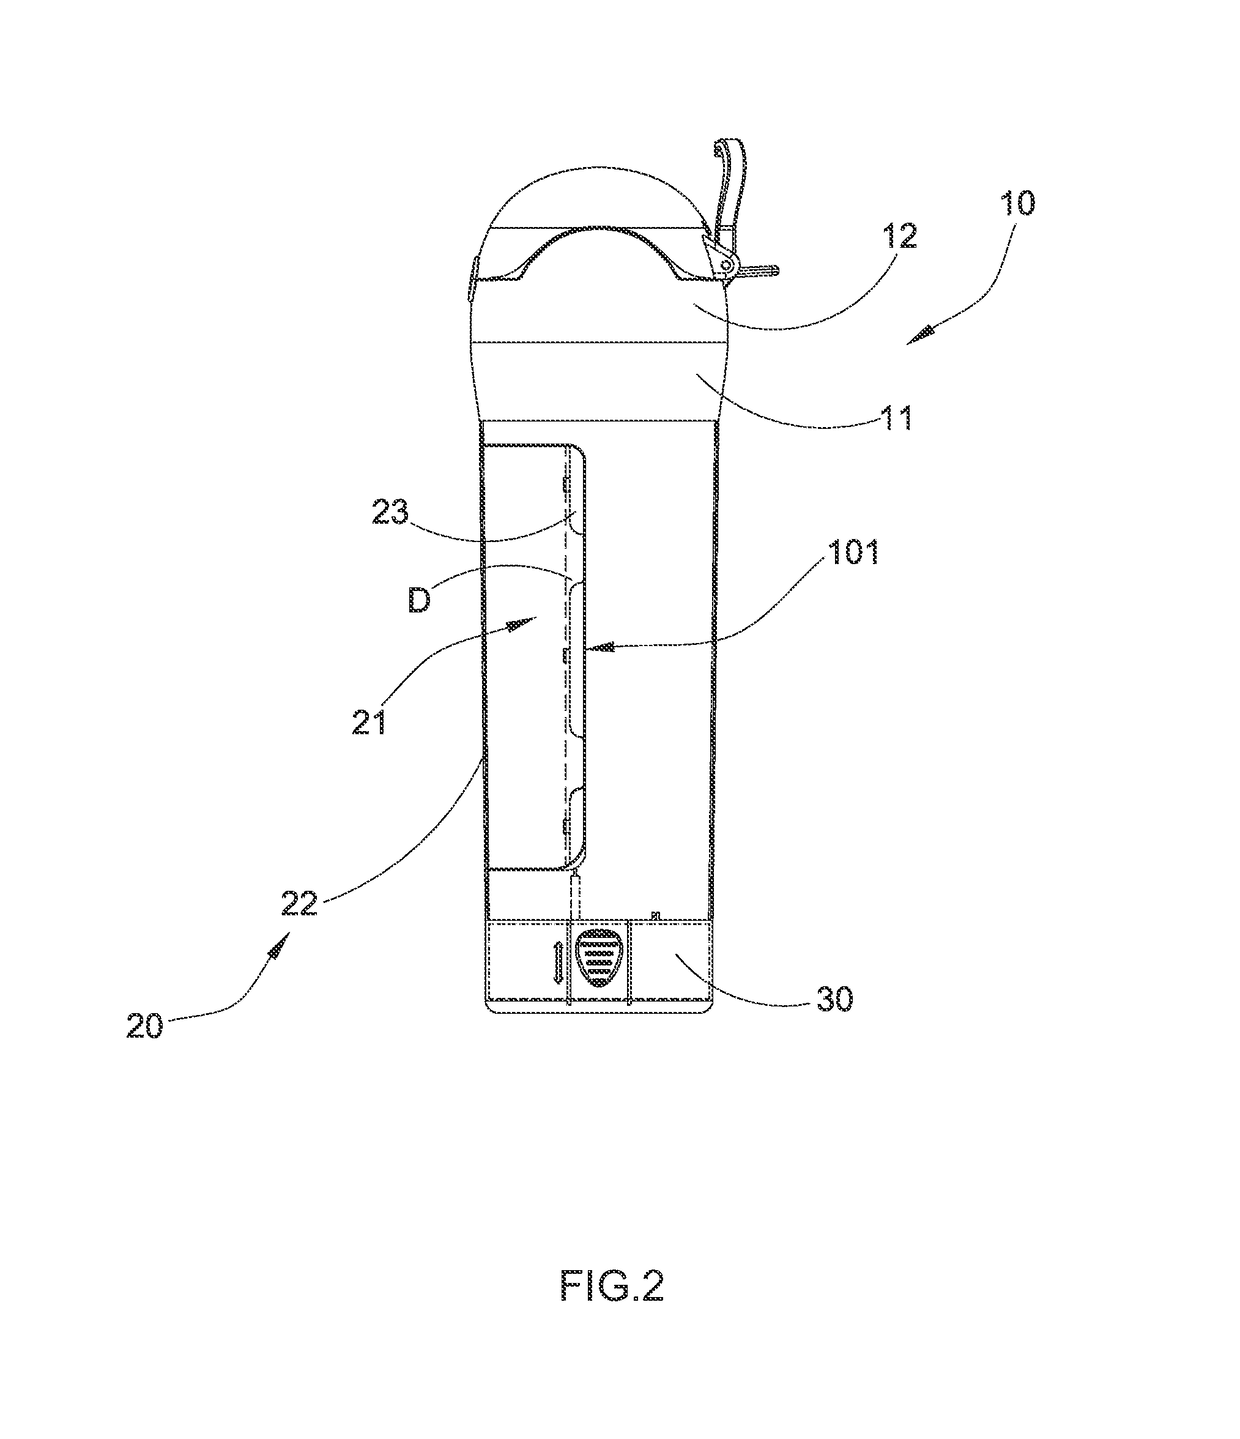 Beverage bottle with accessible station for portable electronic device